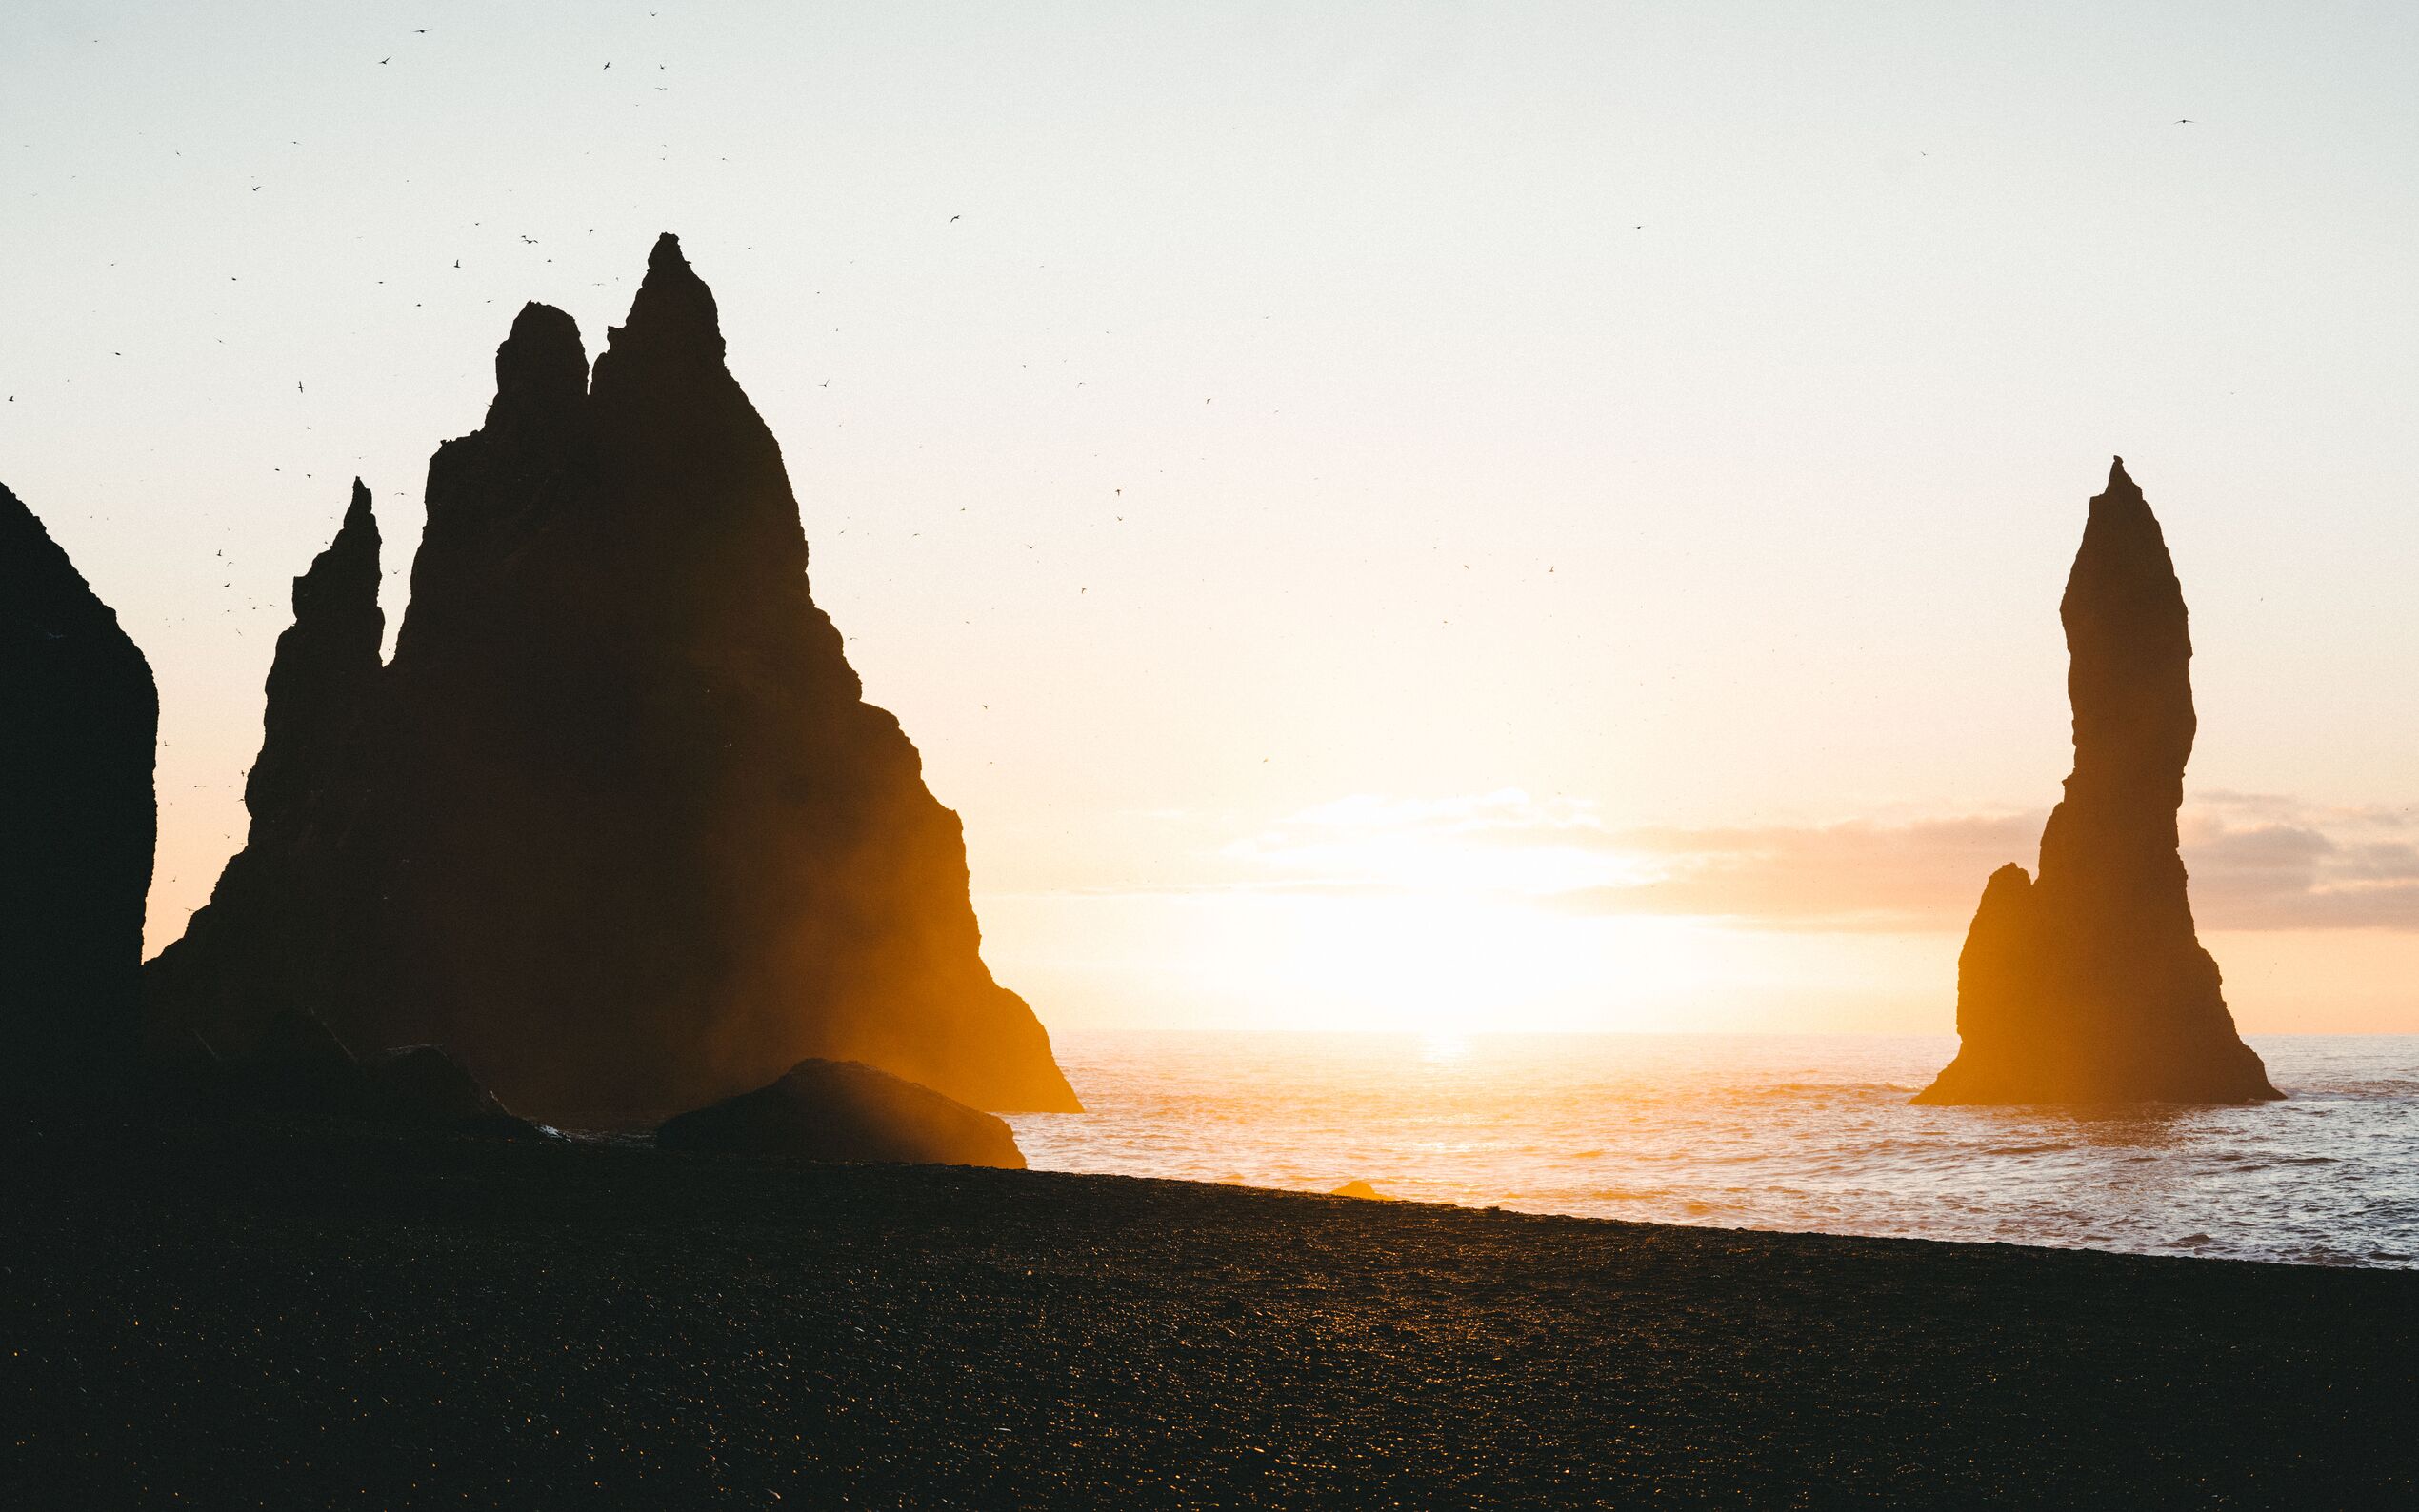 View of the sea stacks at Reynisfjara with the sun sitting low on the horizon and birds circling overhead